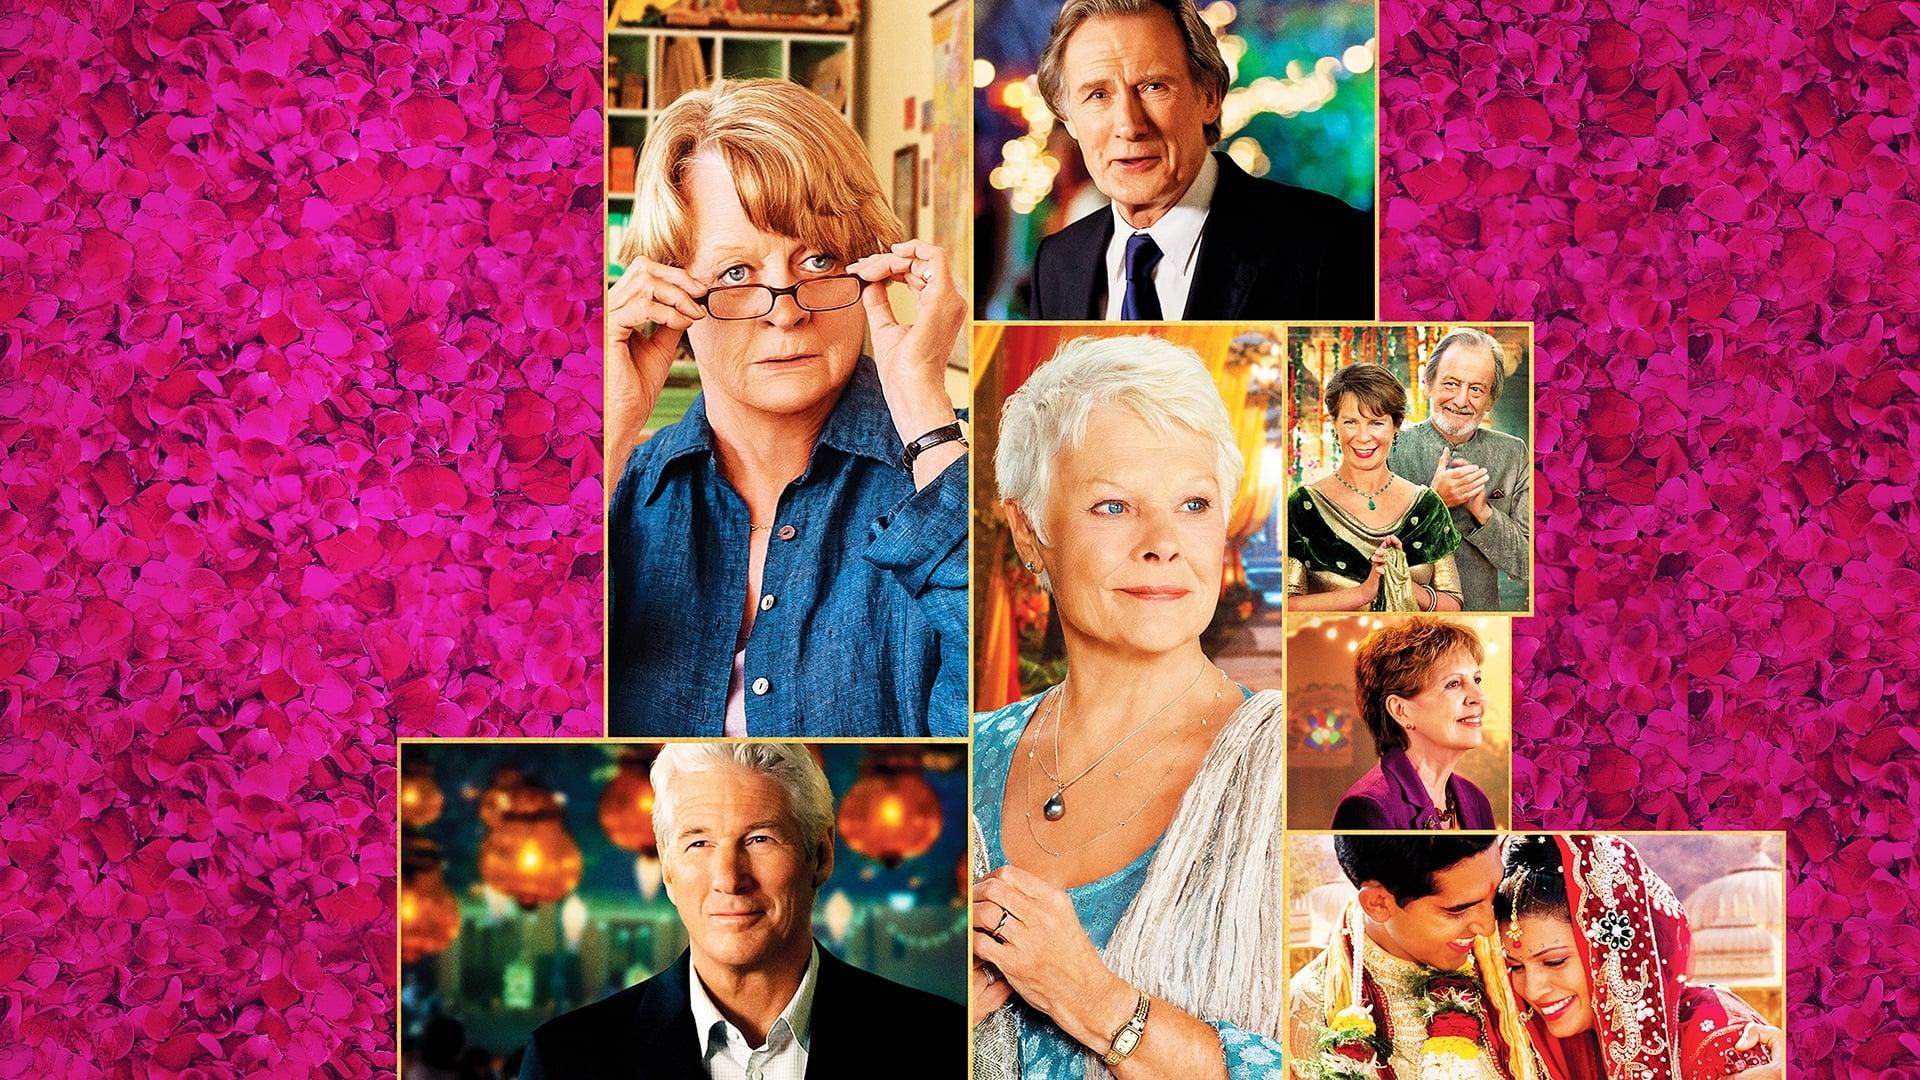 The Second Best Exotic Marigold Hotel backdrop